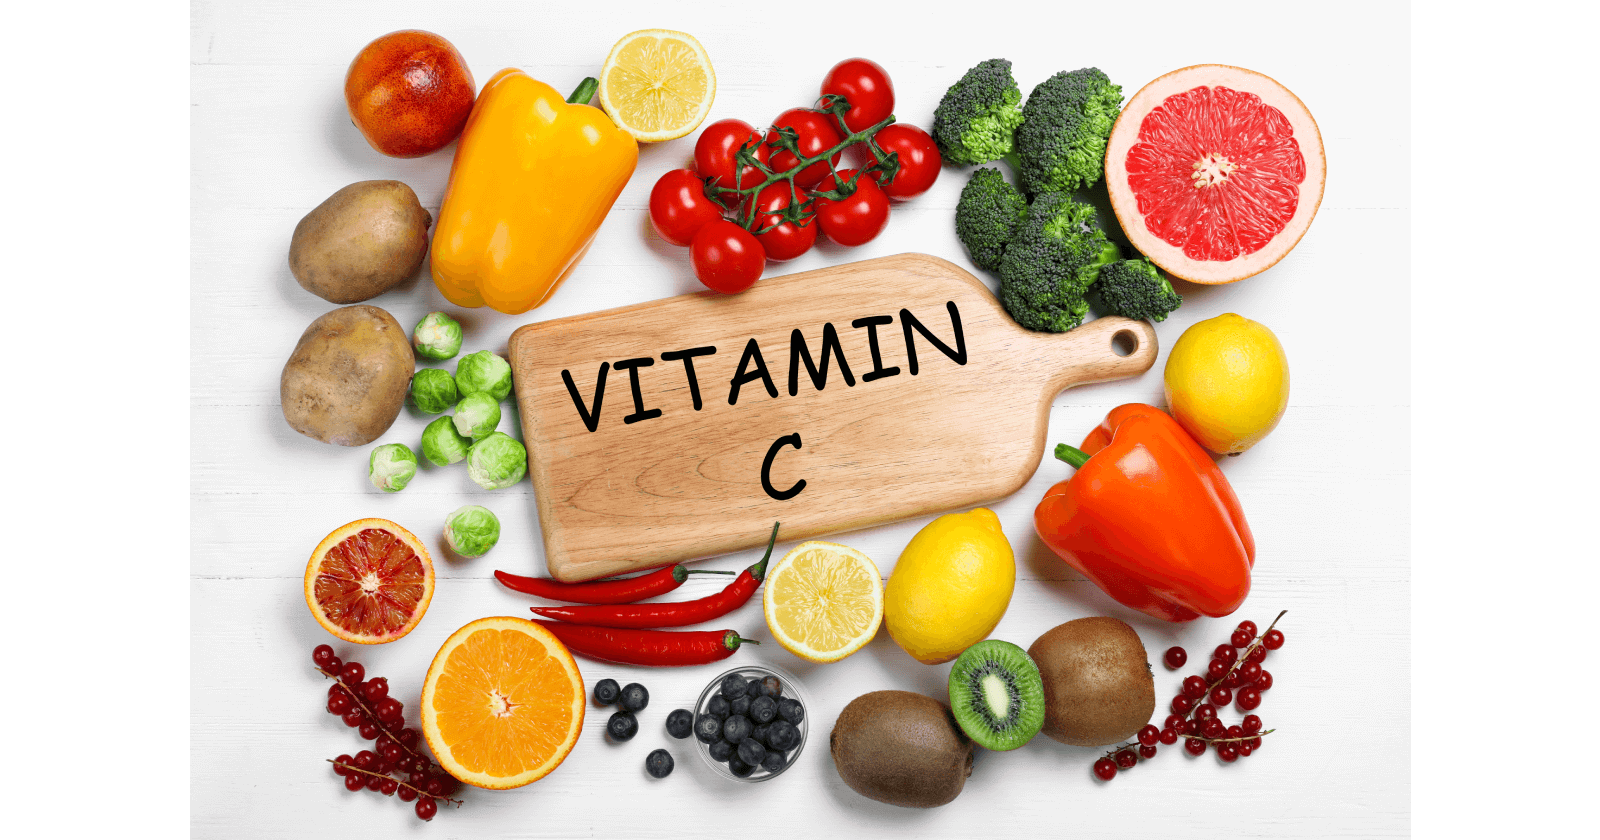 Health benefits of Vitamin C-rich food items (fruits and vegetables)